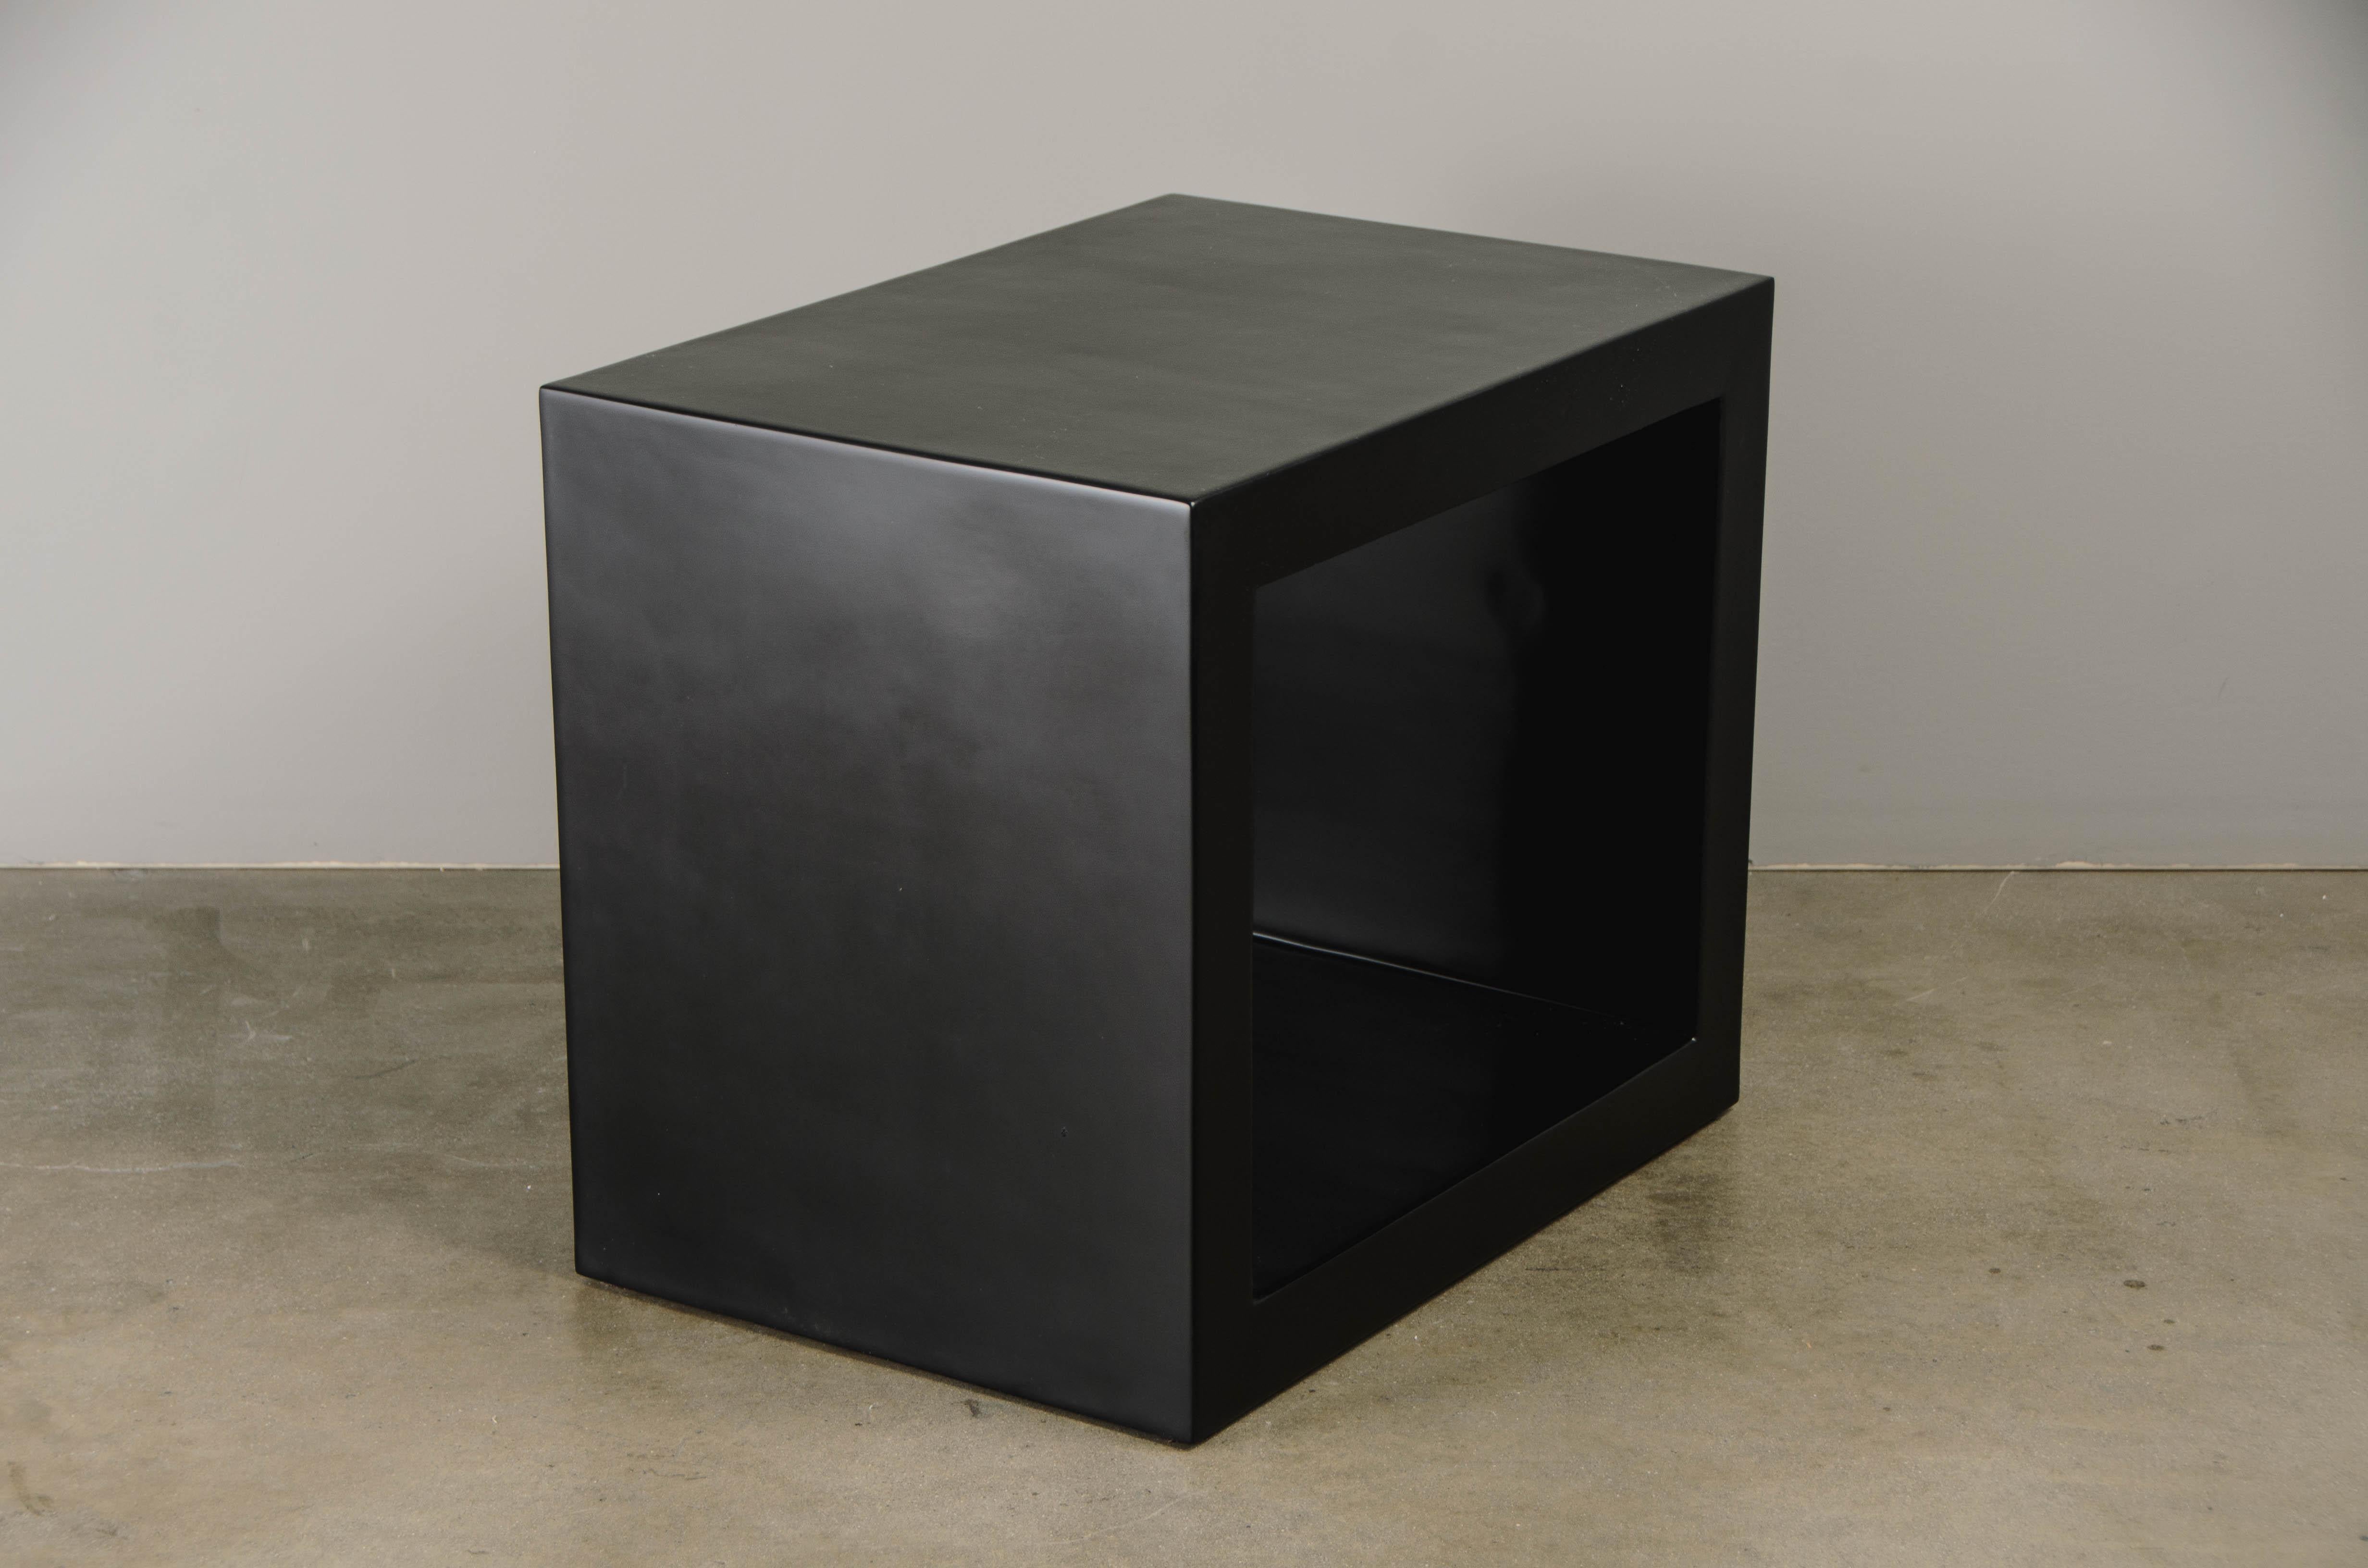 Minimalist Contemporary Window Side Table in Black Lacquer by Robert Kuo, Limited Edition For Sale